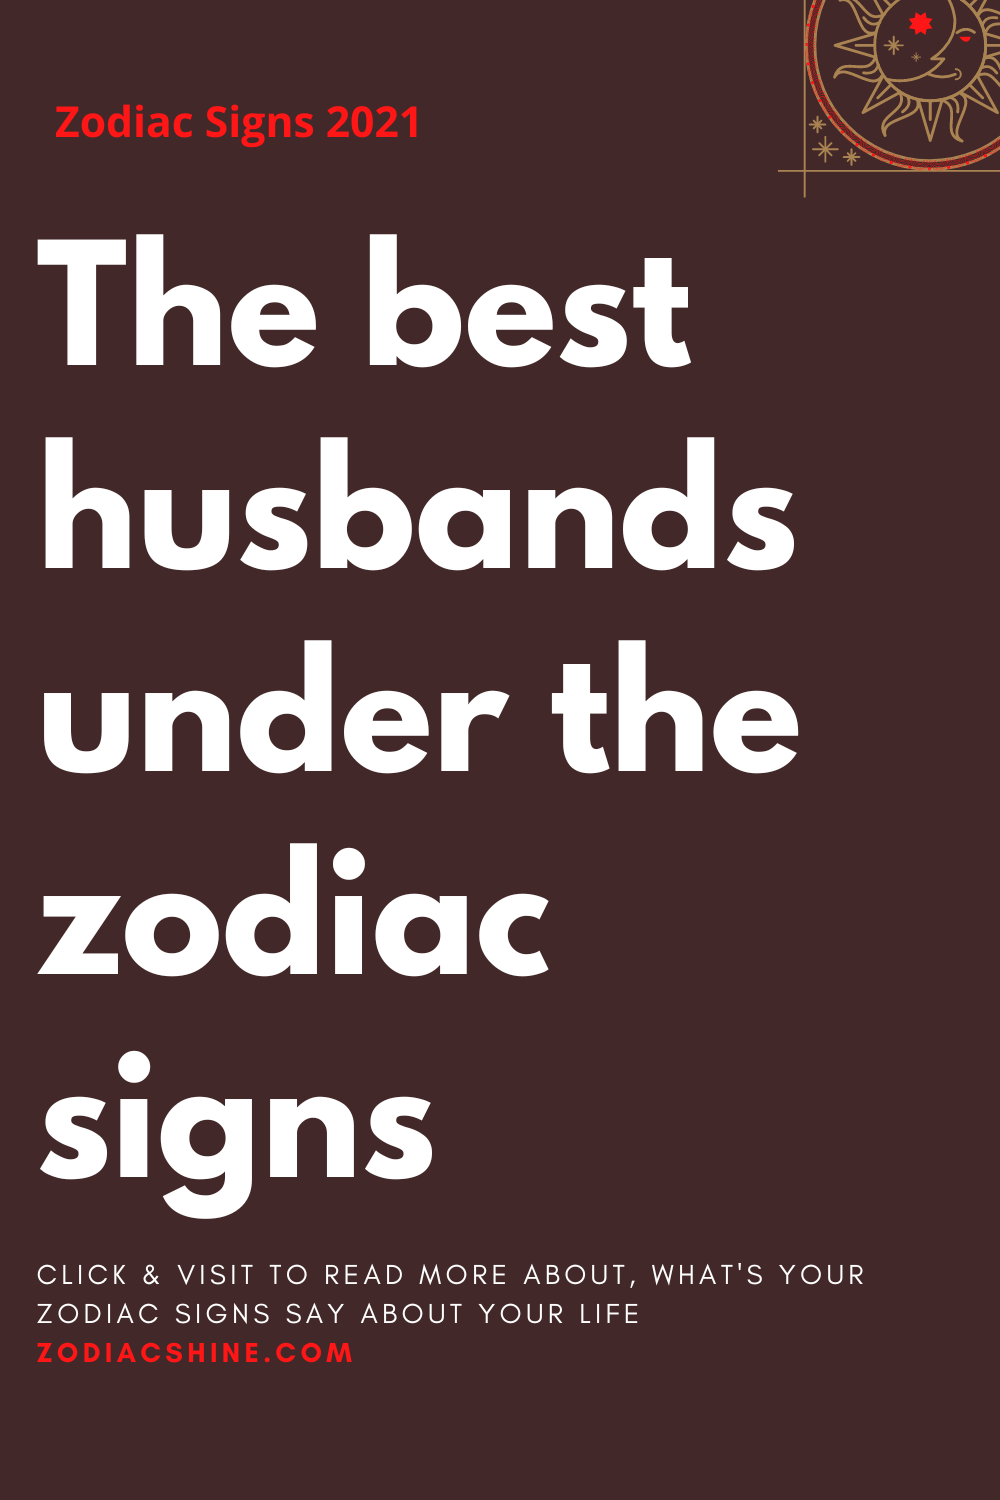 The best husbands under the zodiac signs